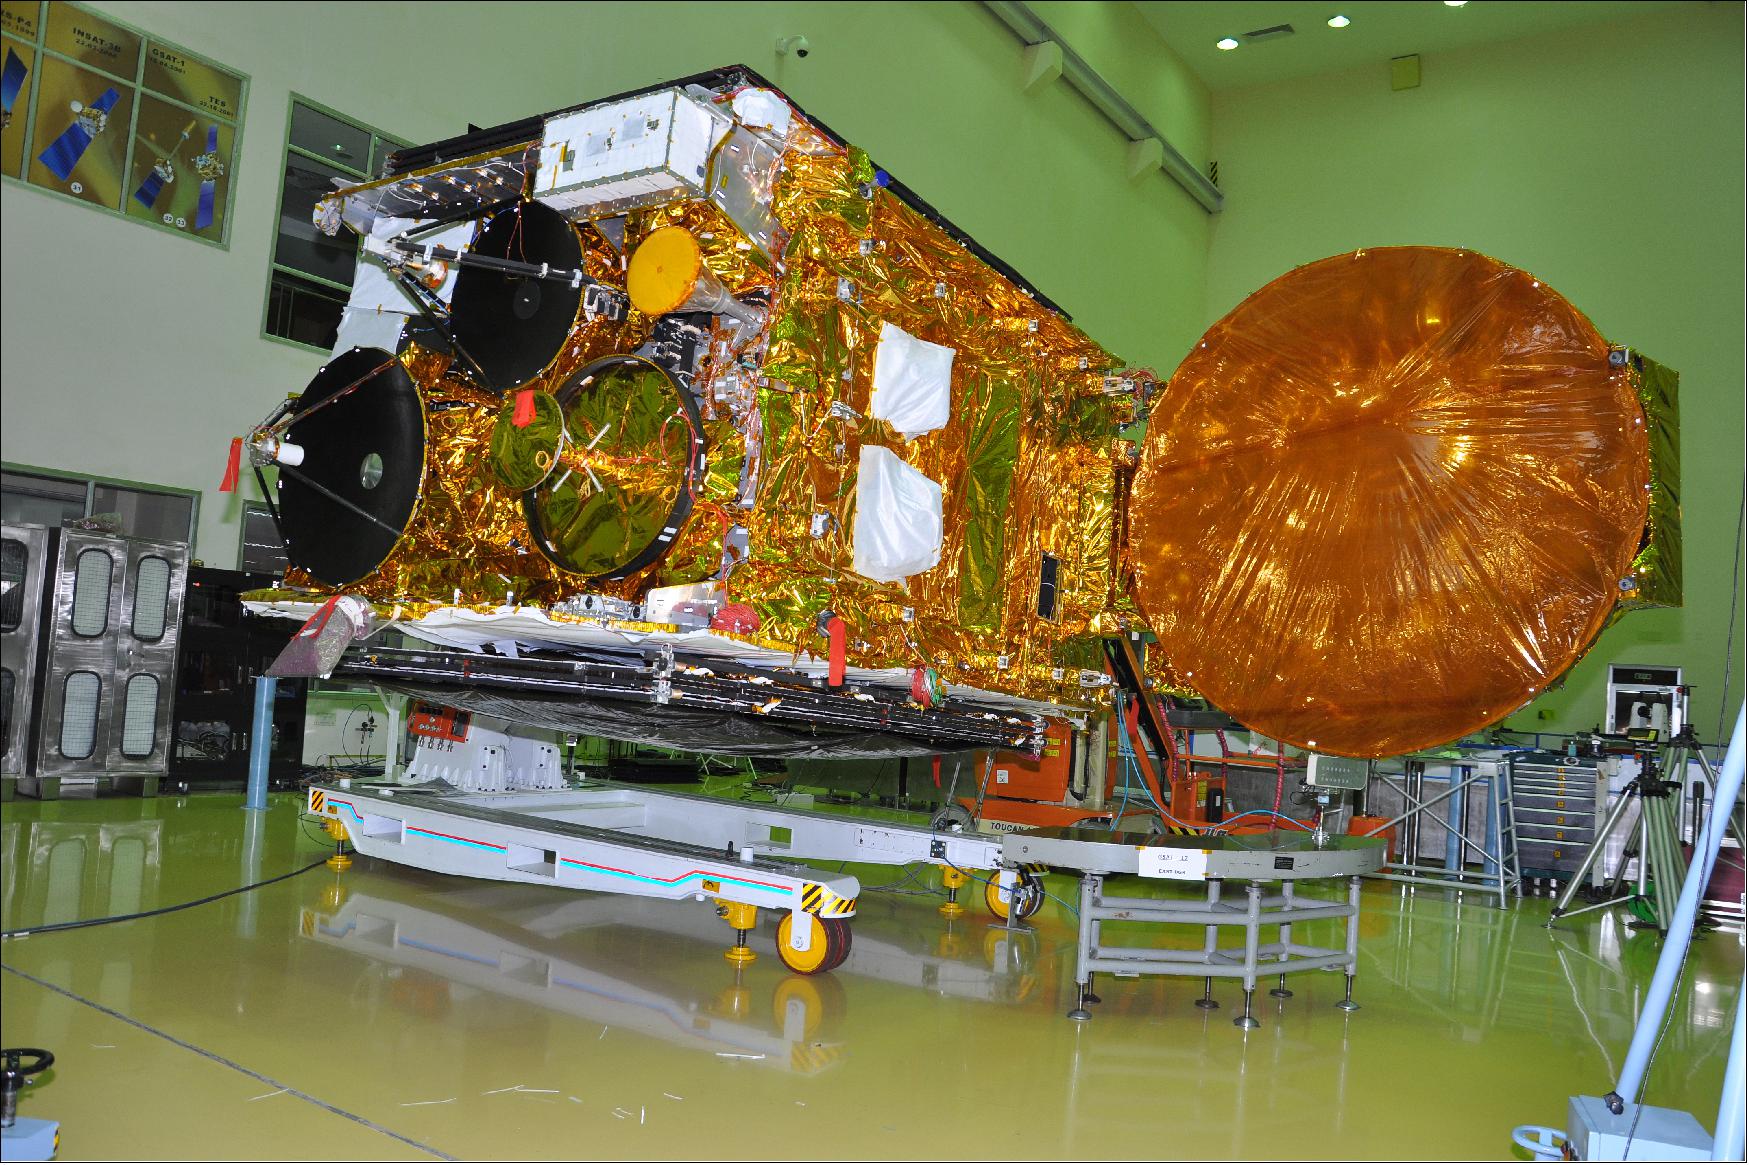 Figure 7: Photo of the GSAT-17 satellite in clean room with one of its antennas deployed (image credit: ISRO) 9)